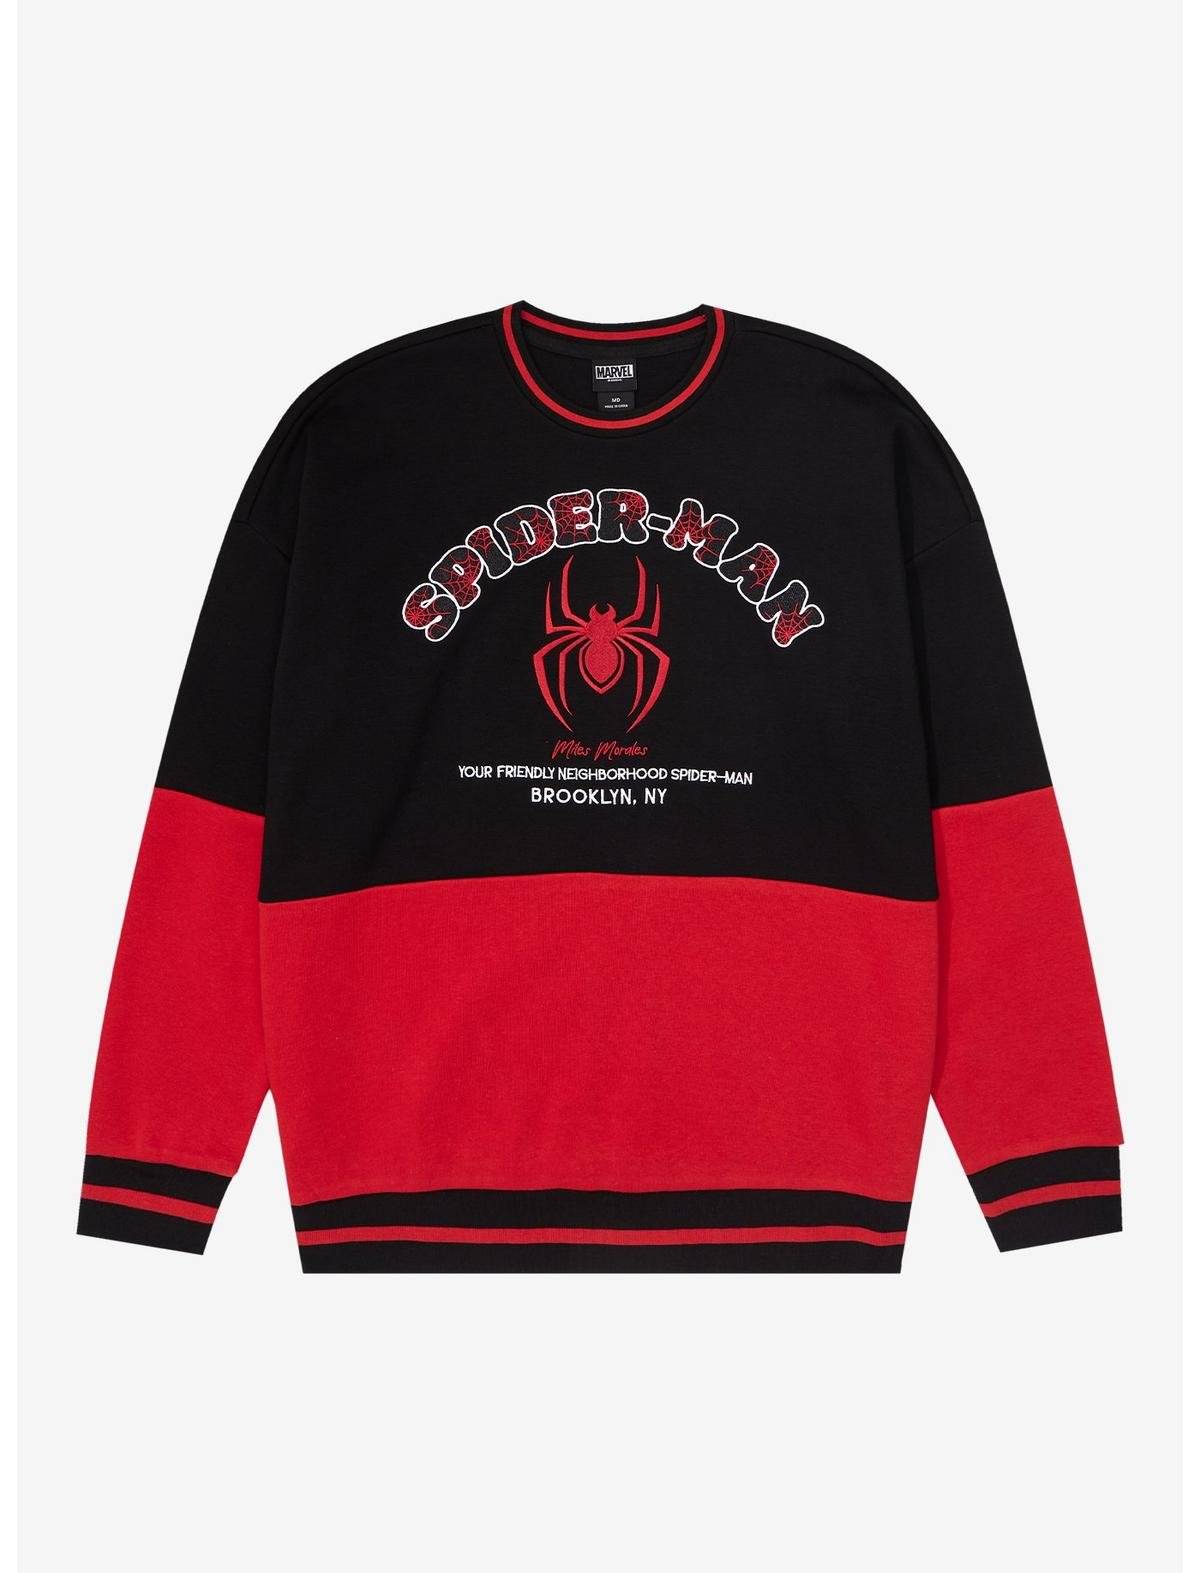 Spider-Man Across the Spider-Verse boxlunch sweater